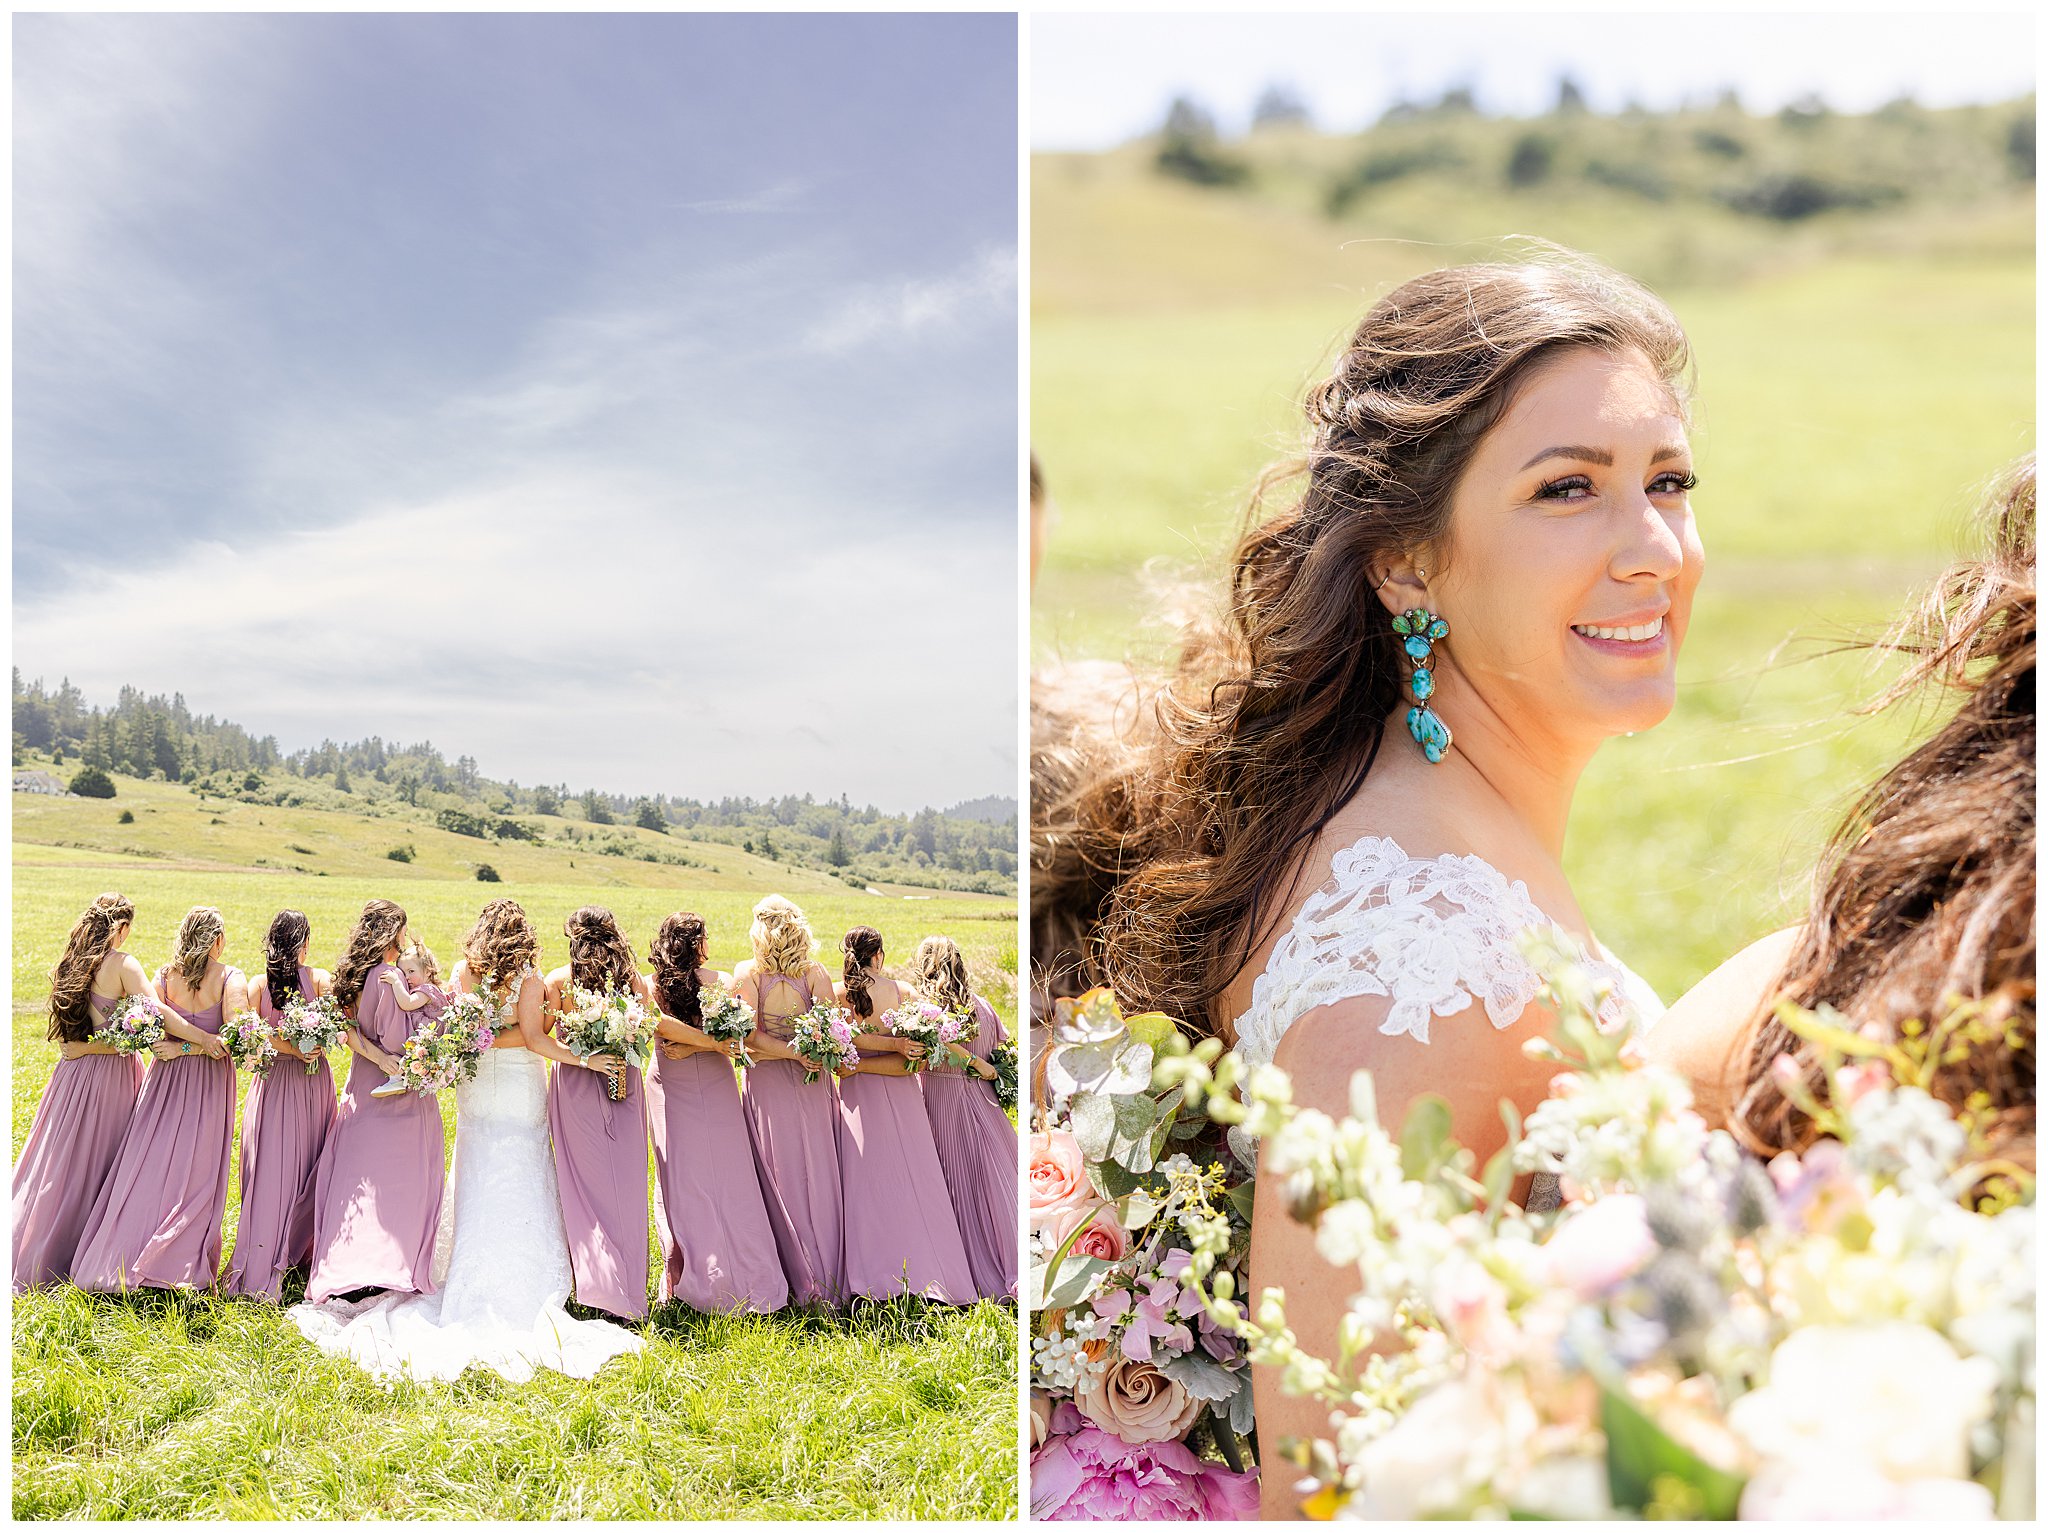 At the Bluff Wedding Ferndale CA West Coastline Barn Reception Mauve Bridesmaids Dresses Western Boots First Look,